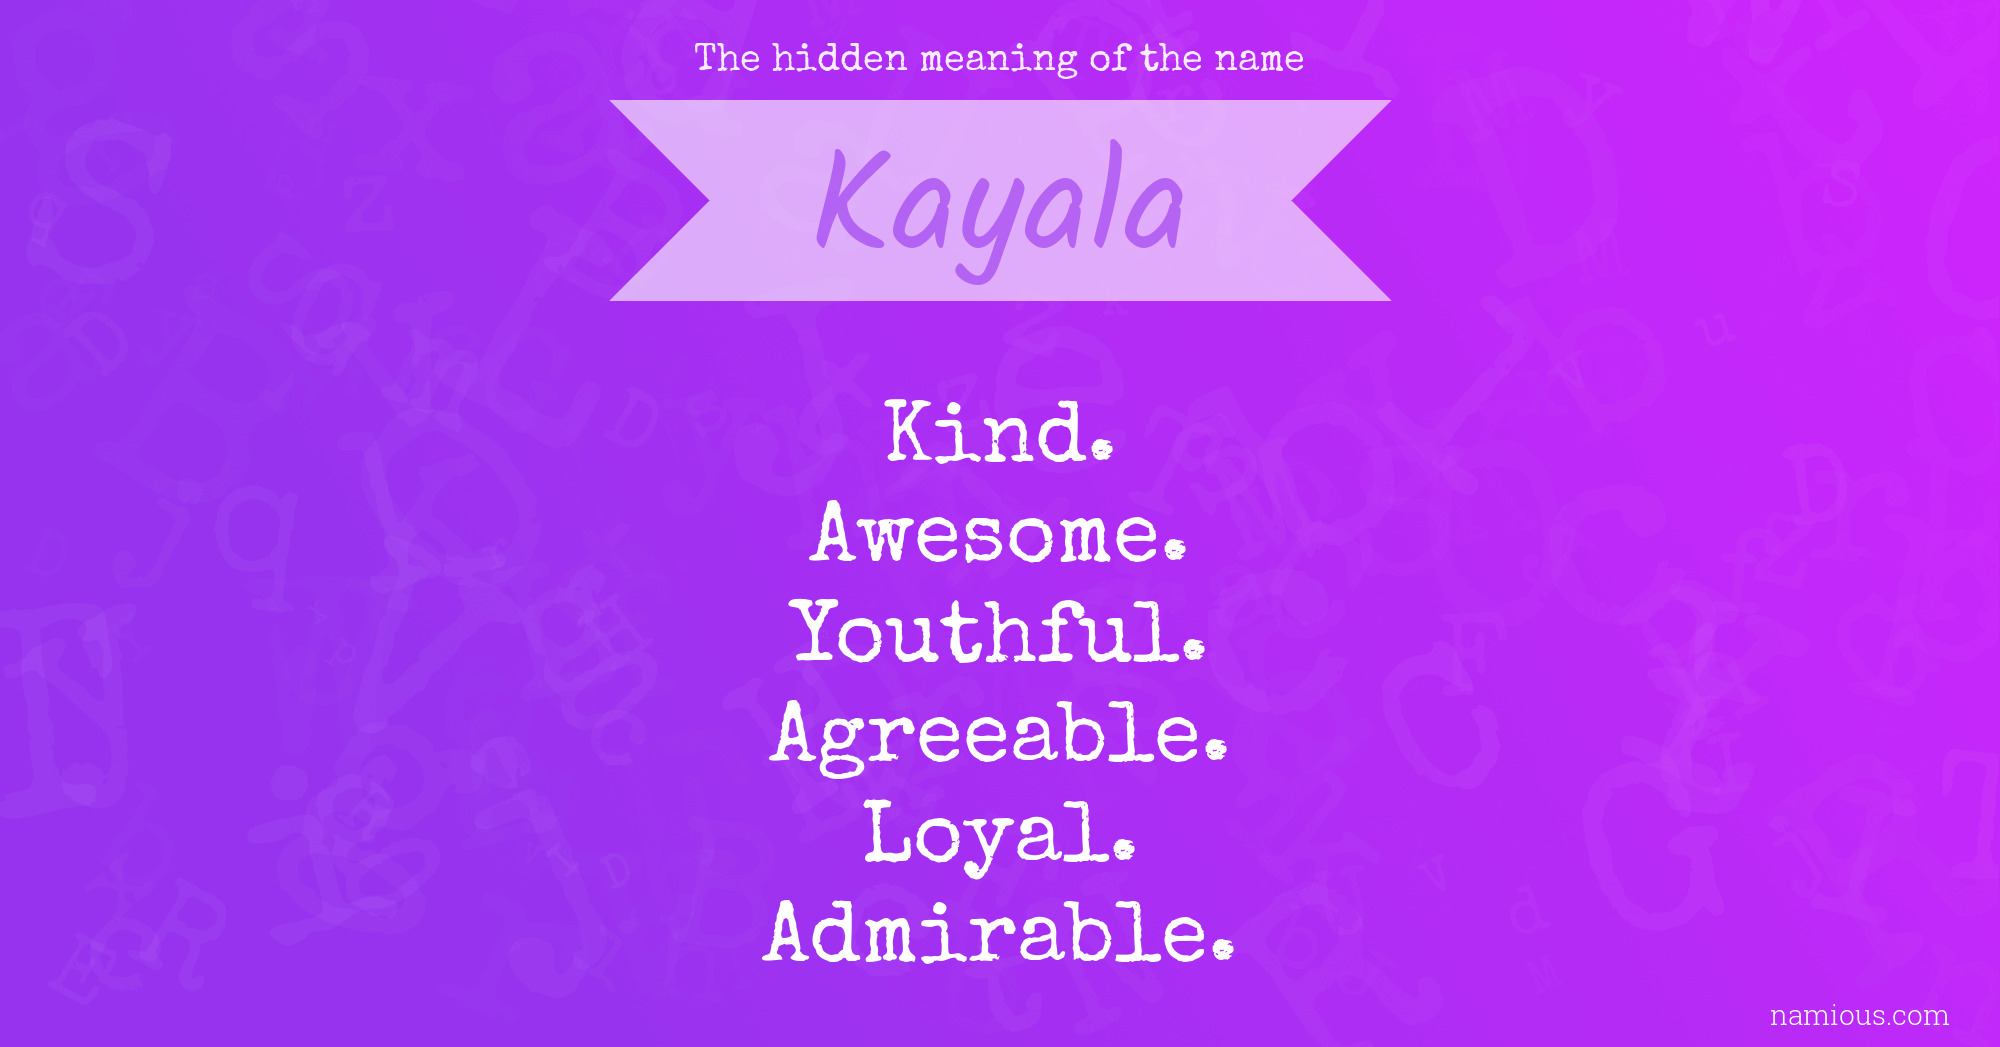 The hidden meaning of the name Kayala